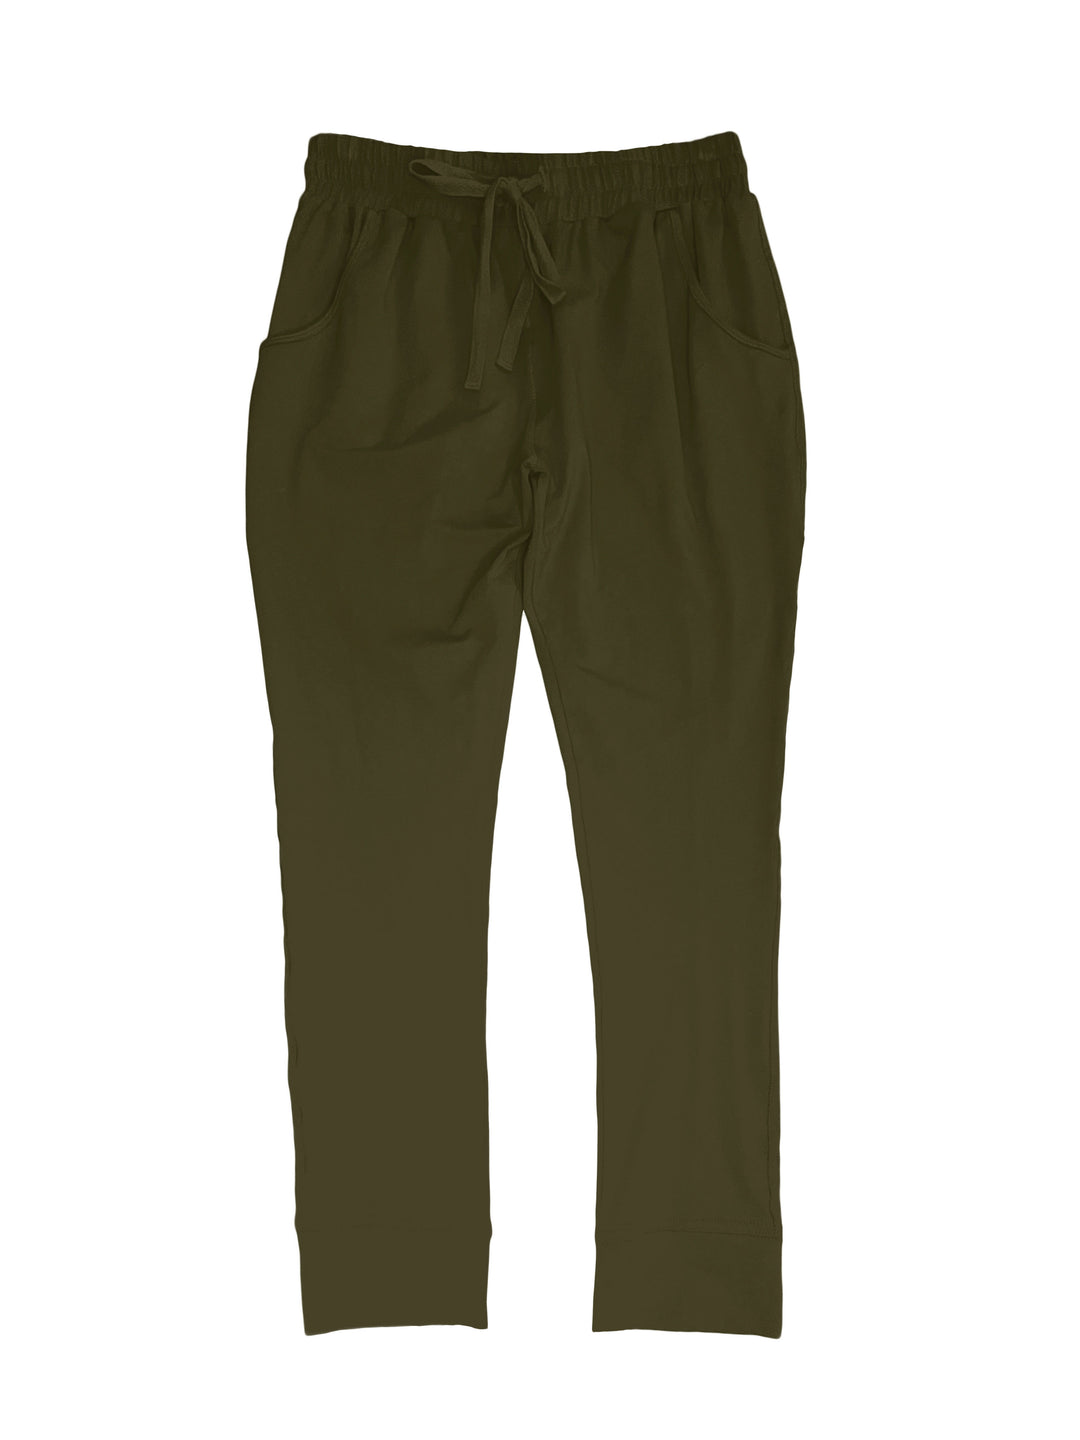 jogger pant in bamboo in olive green